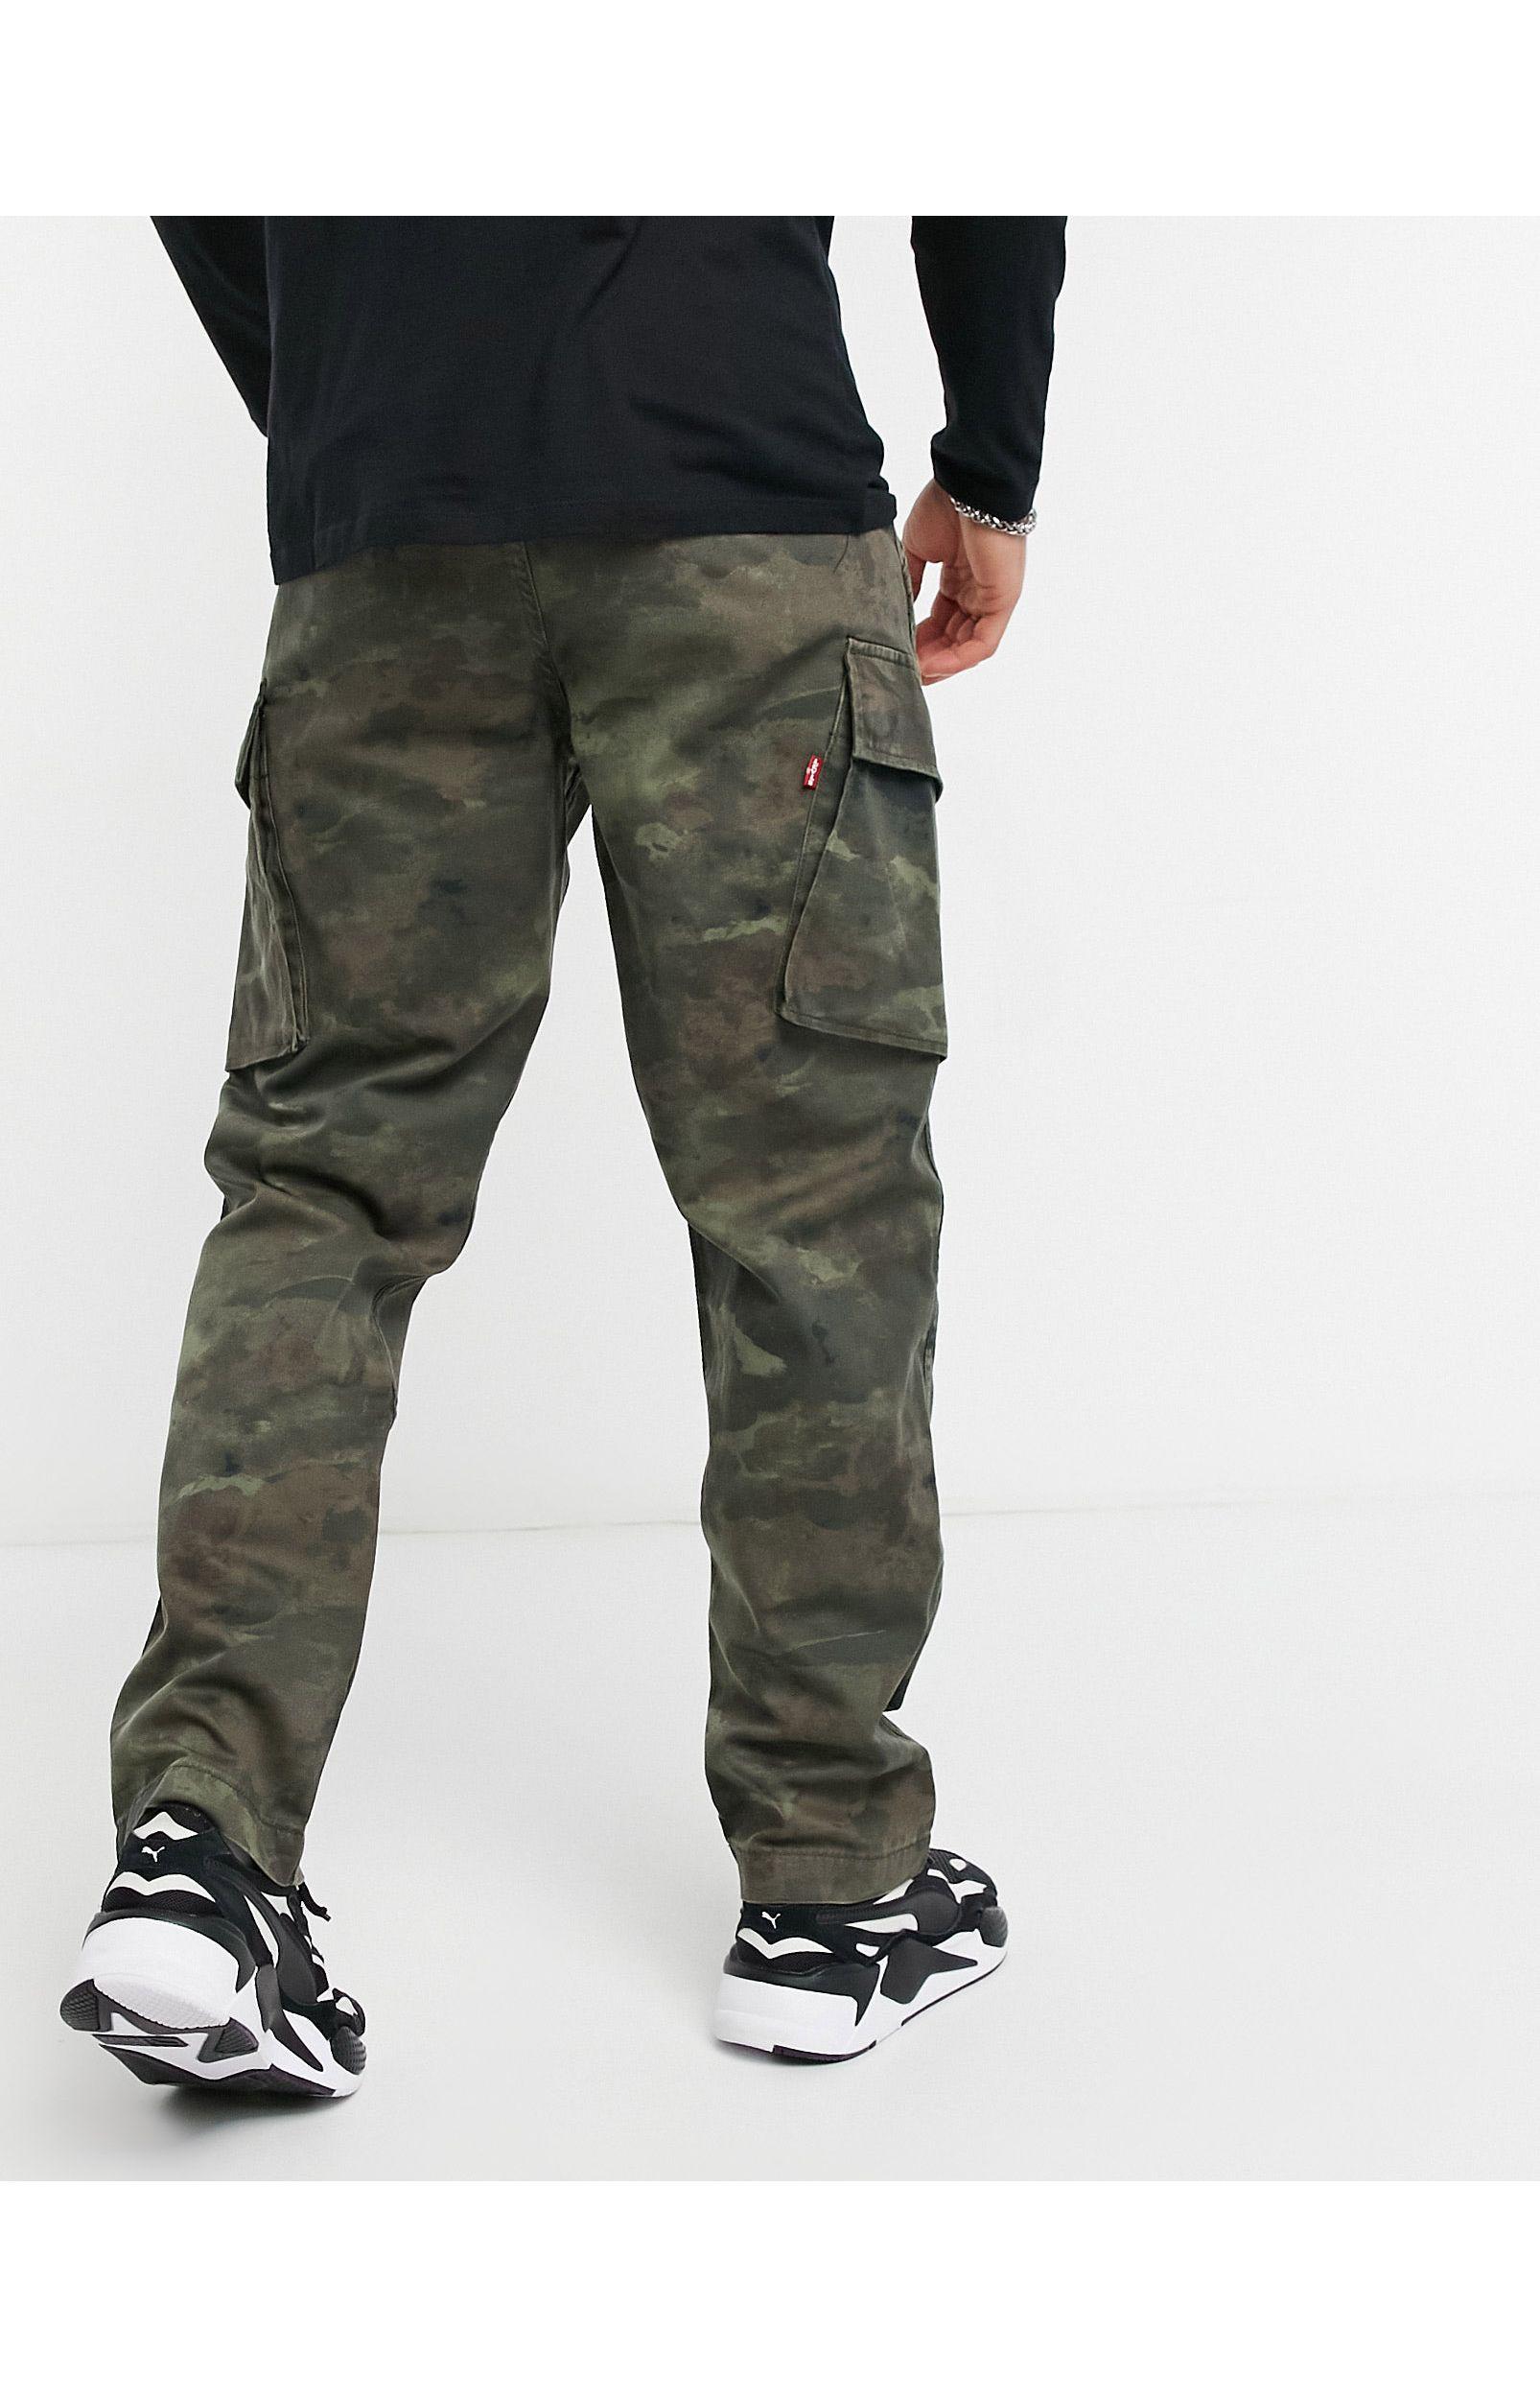 Supreme X Levis Camouflage Trousers in Green for Men